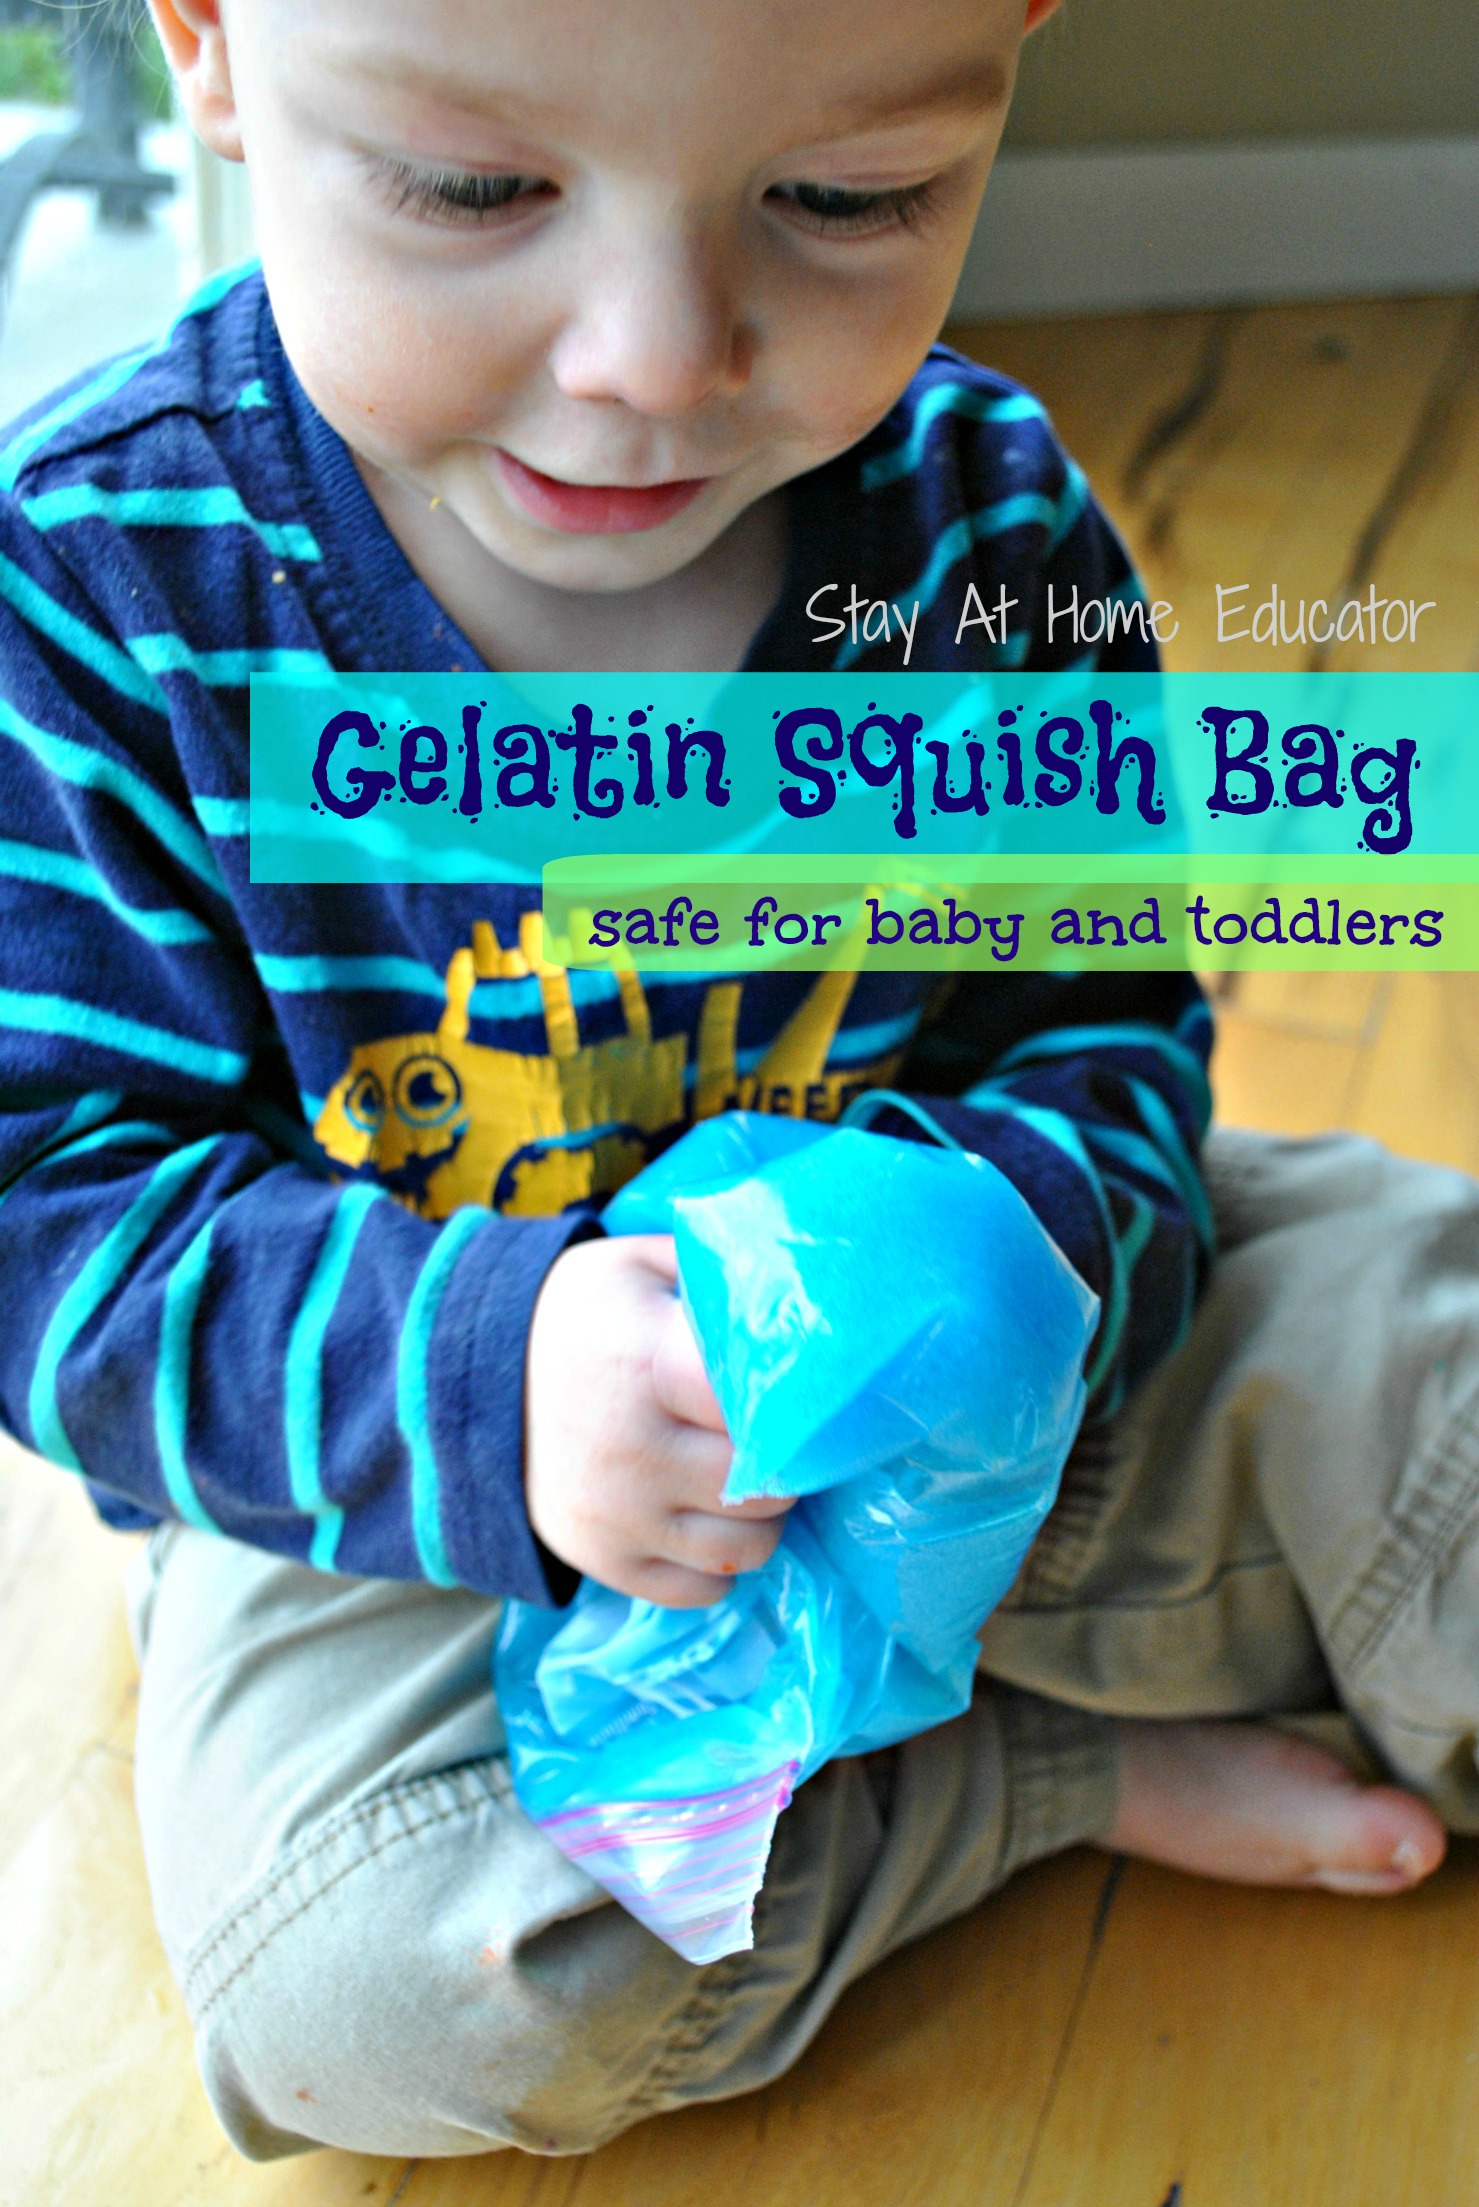 Gelatin Squish Bags are great sensory play, safe for baby and toddlers - Stay At Home Educator